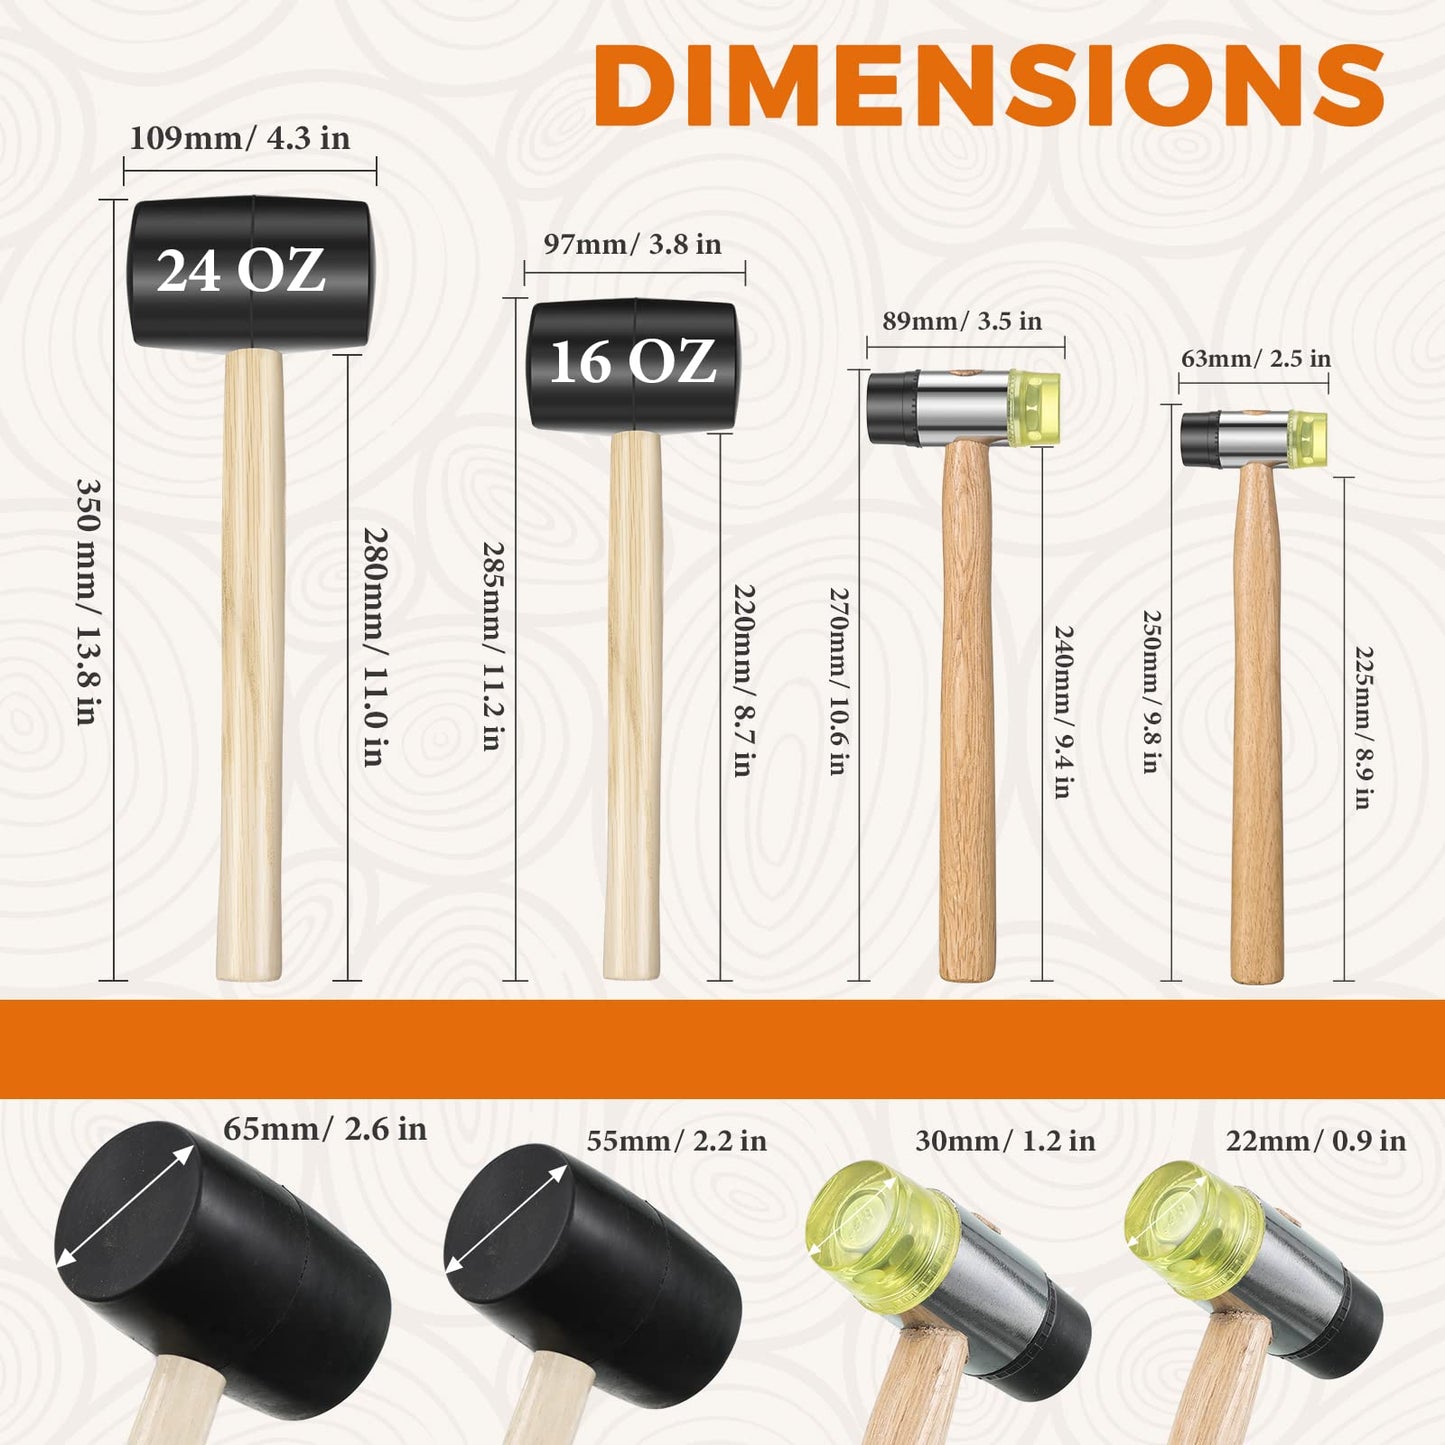 4 Pieces 16 oz/ 24 oz Rubber Mallet Hammer and 25 mm/ 35 mm Double Face Hammer, Rubber Hammer Soft Hammer Wood Handle Hammer for Flooring DIY Crafts